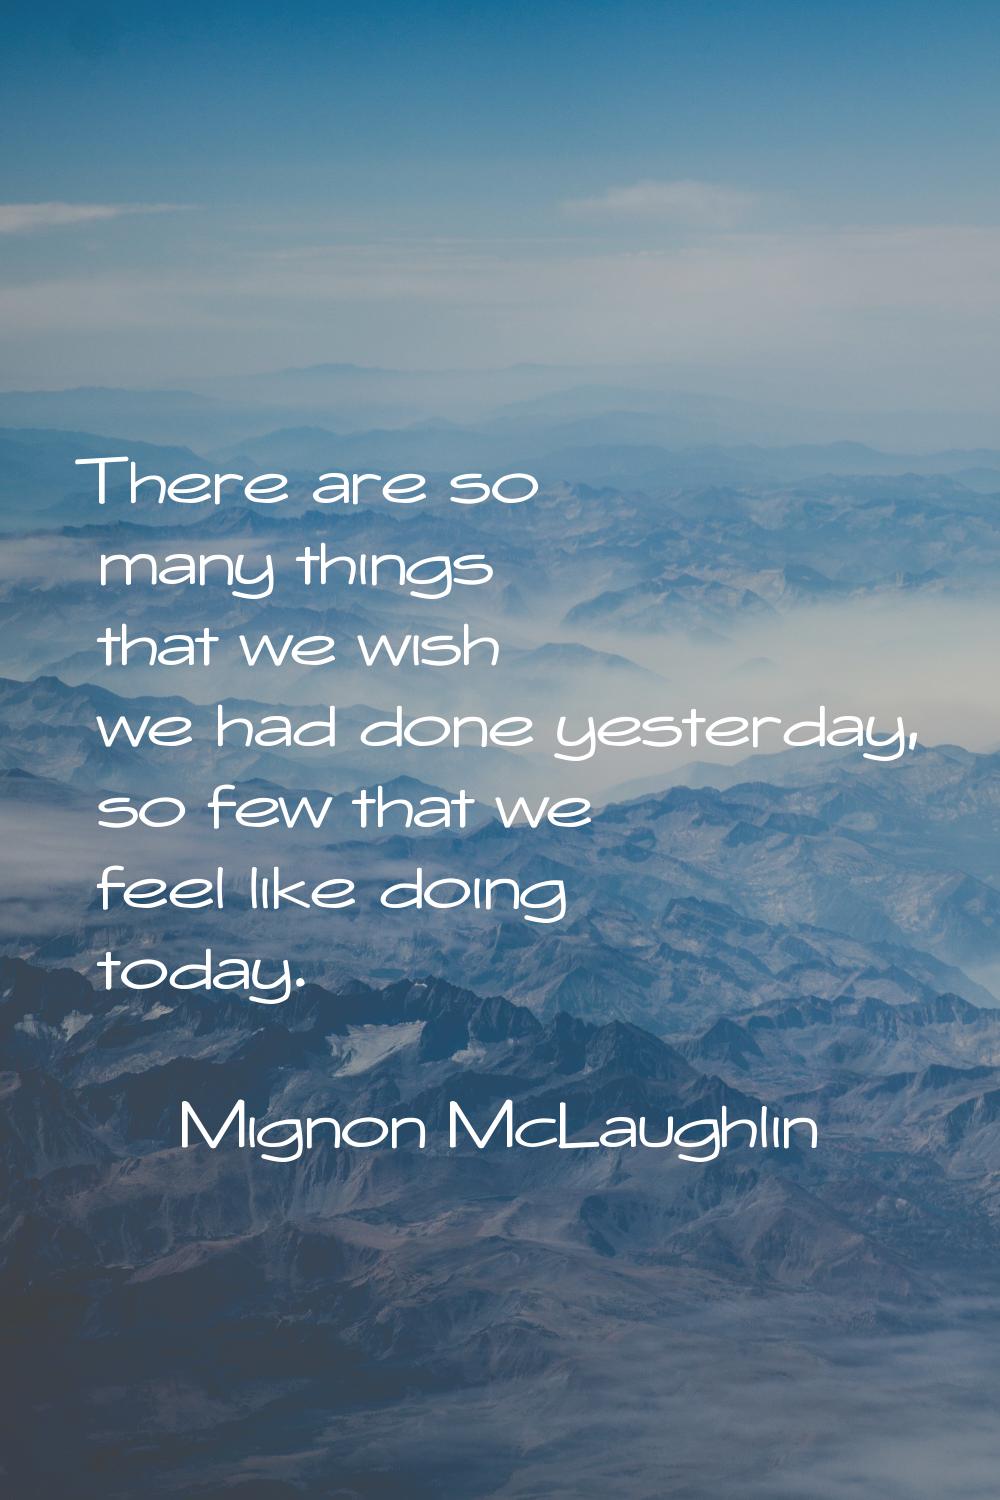 There are so many things that we wish we had done yesterday, so few that we feel like doing today.